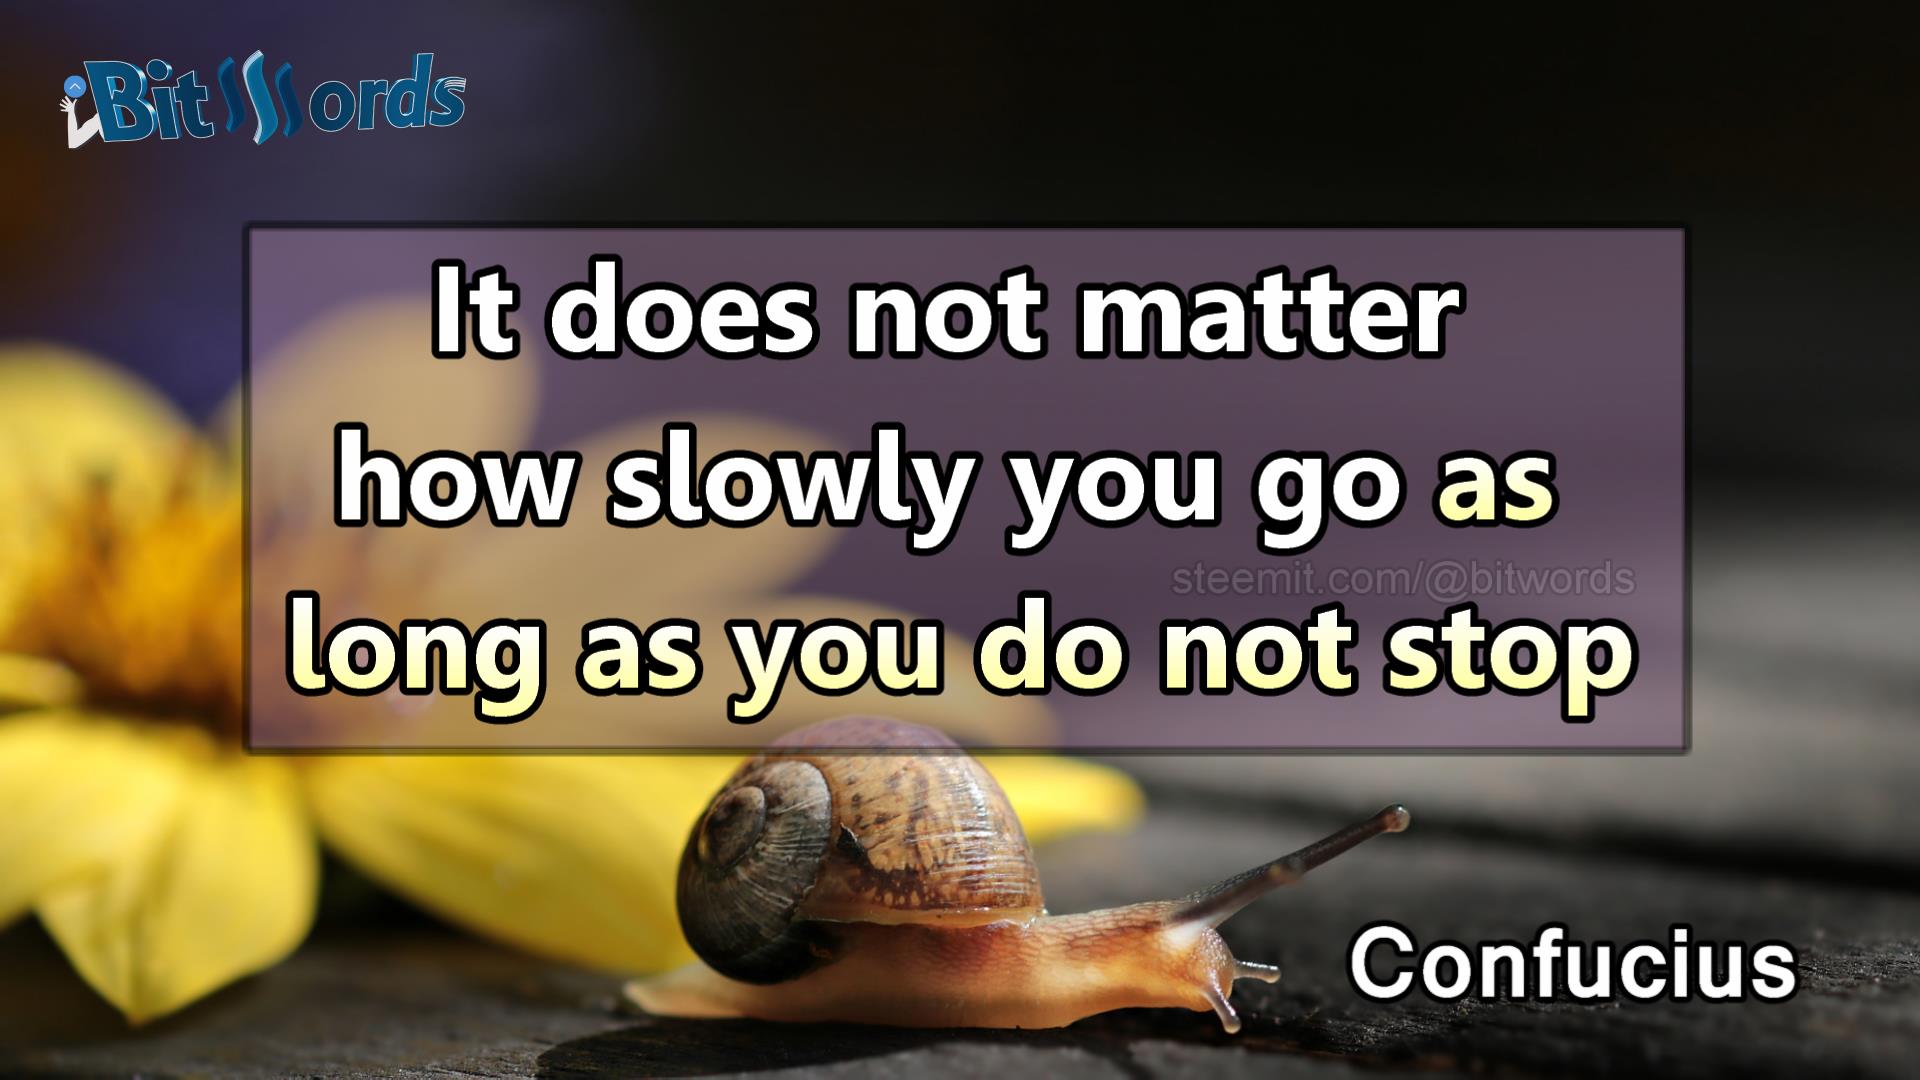 bitwords steemit a daily dose of motivation with confucious.jpg